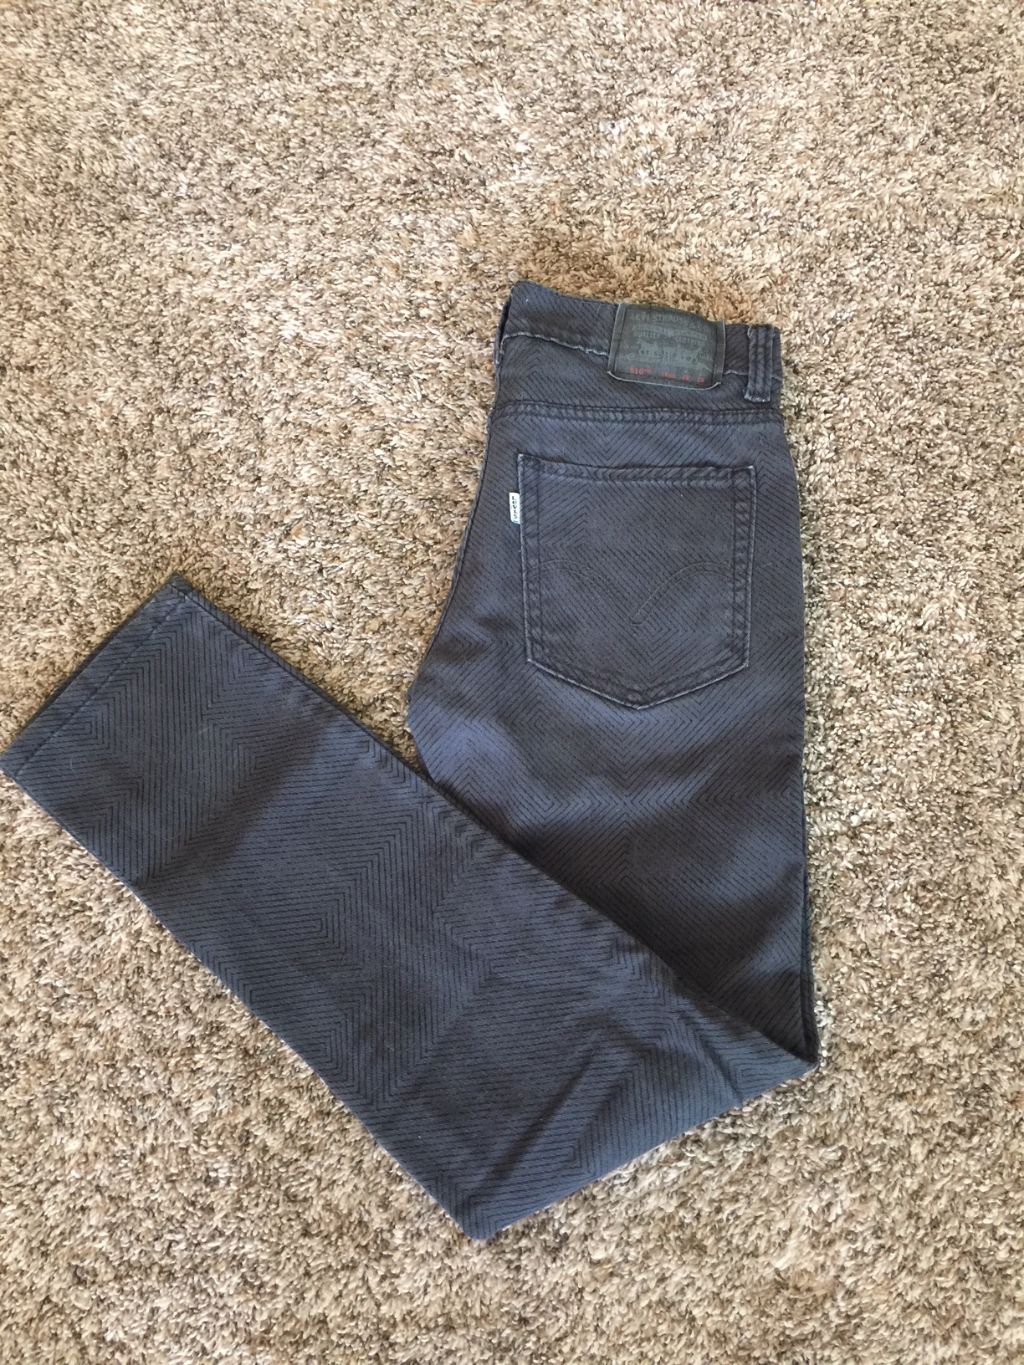 Pre-Loved Levi’s 510 Boys Jeans Size 16 (28x28) Like New